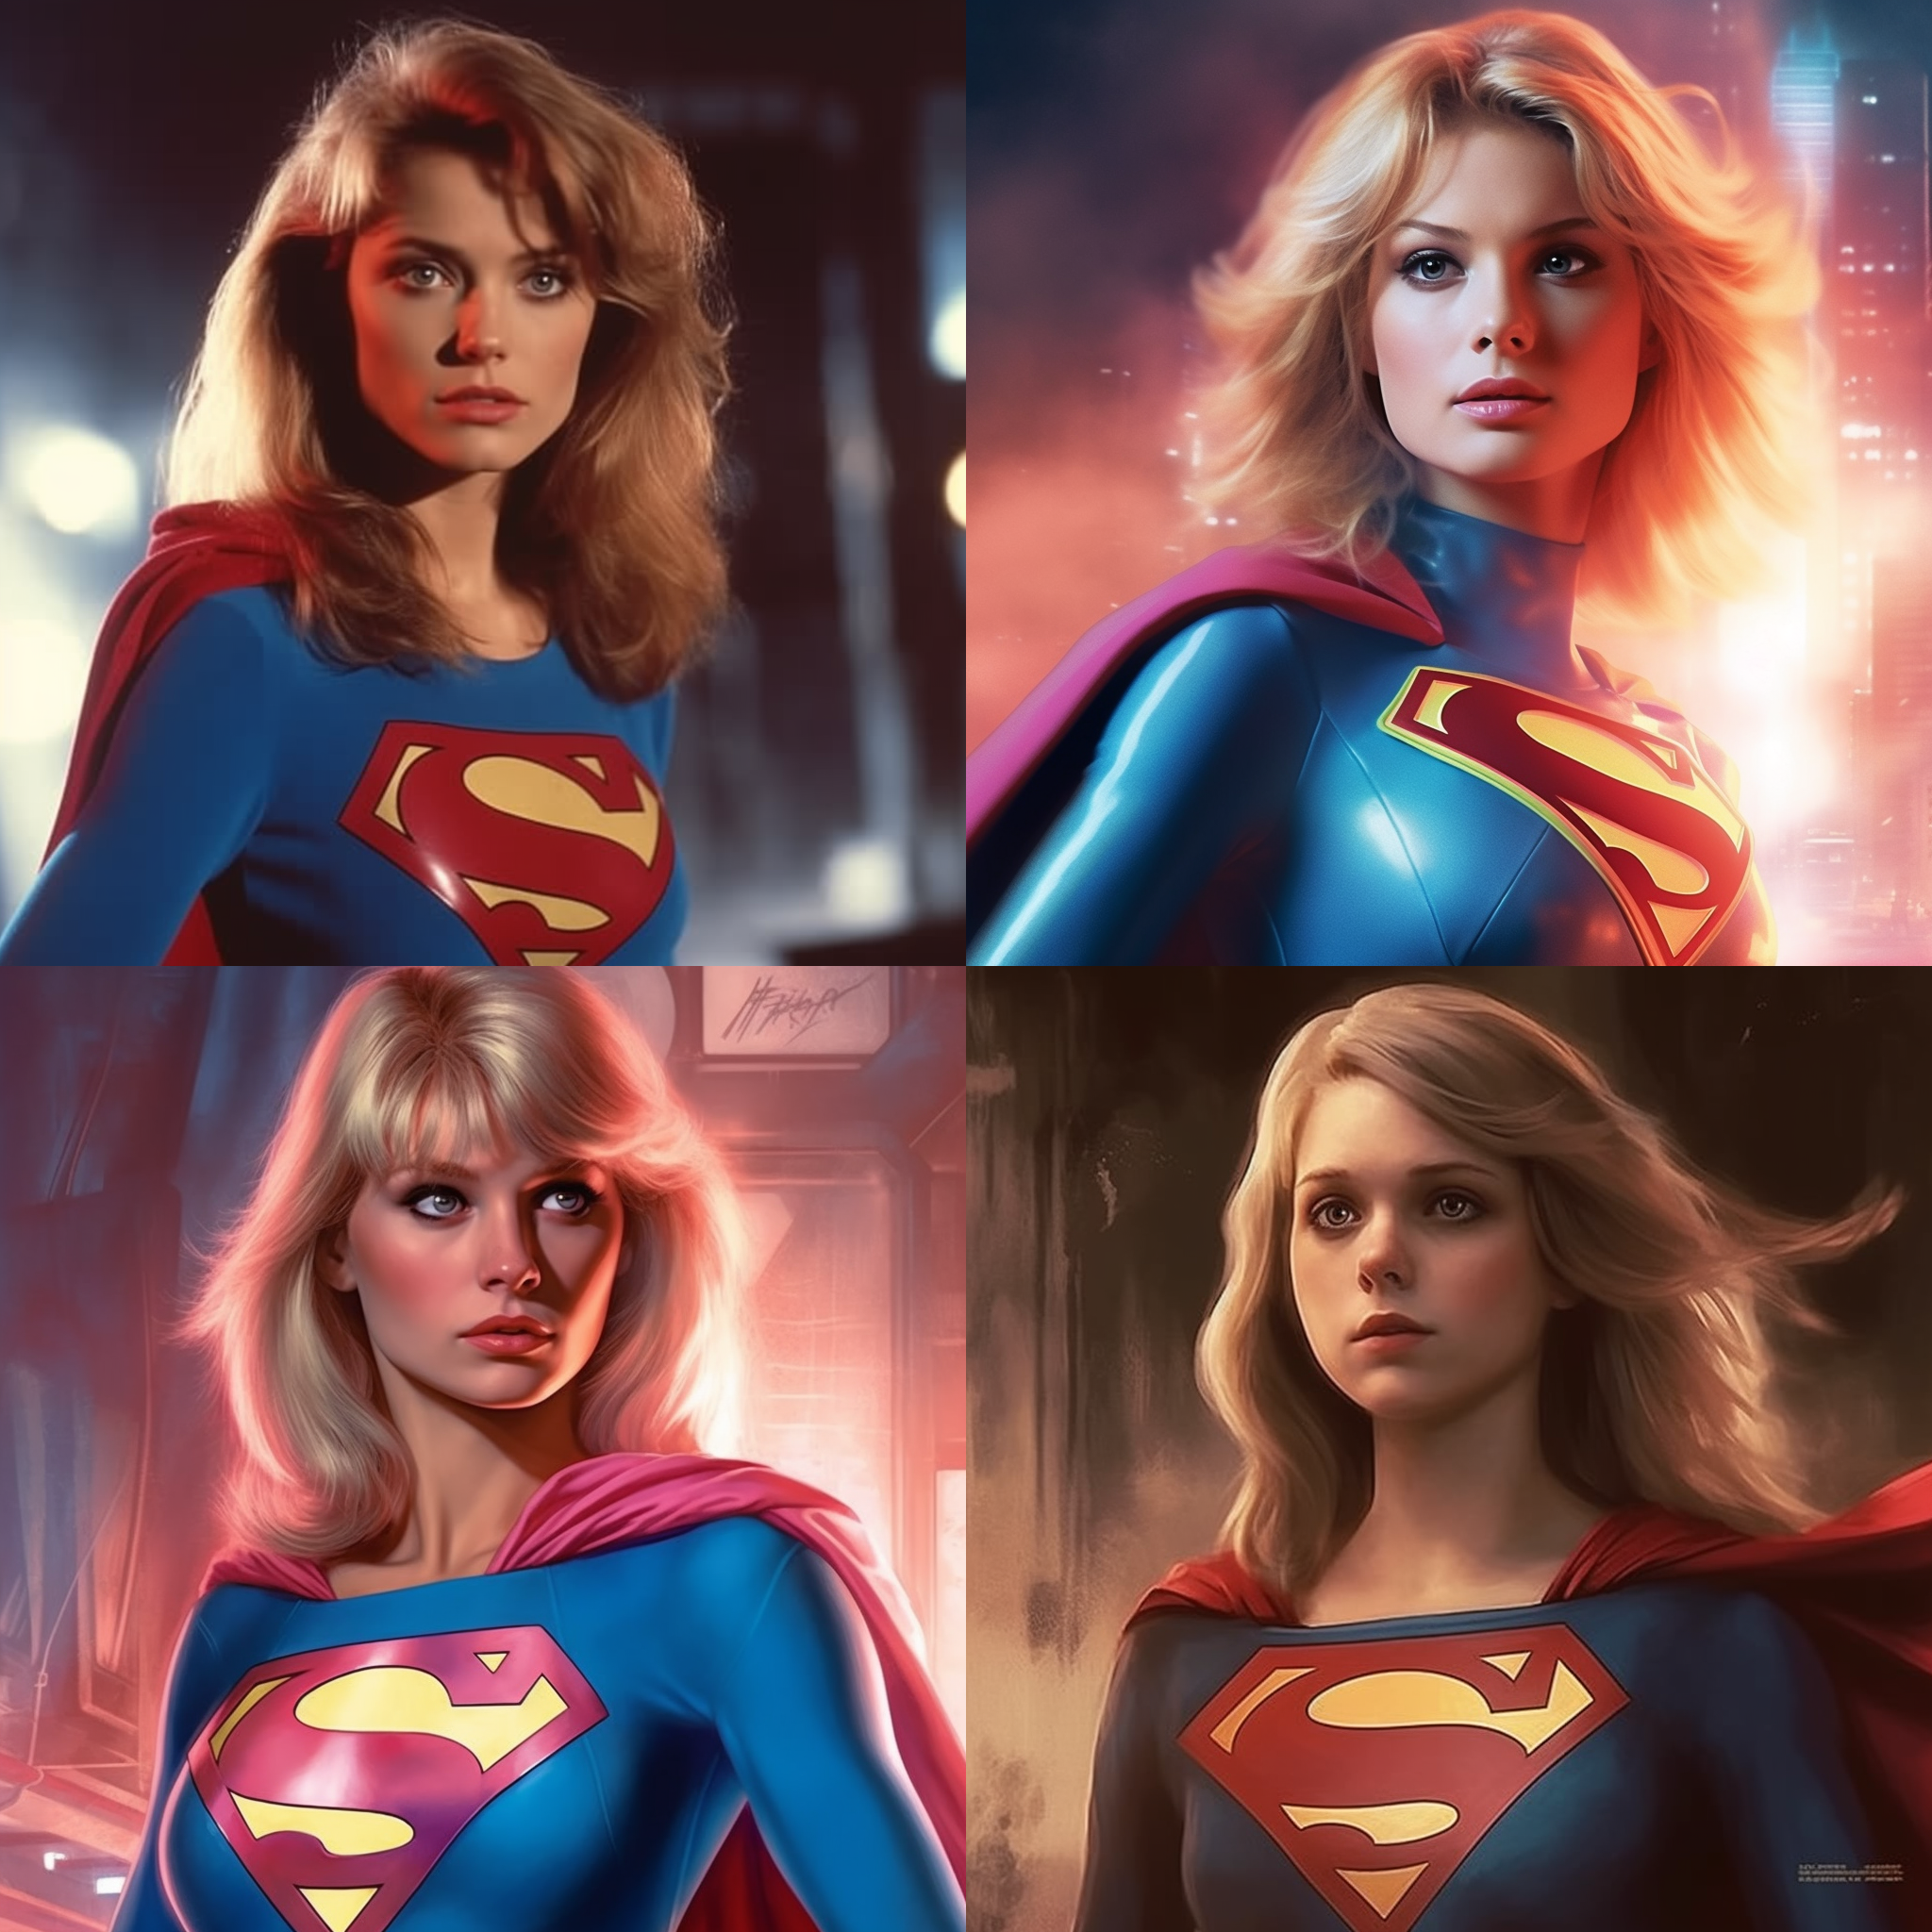 Sir_Frogdick_1984_Supergirl_movie_d1dc0478-e1e0-4594-8d42-2c7711745f76.png